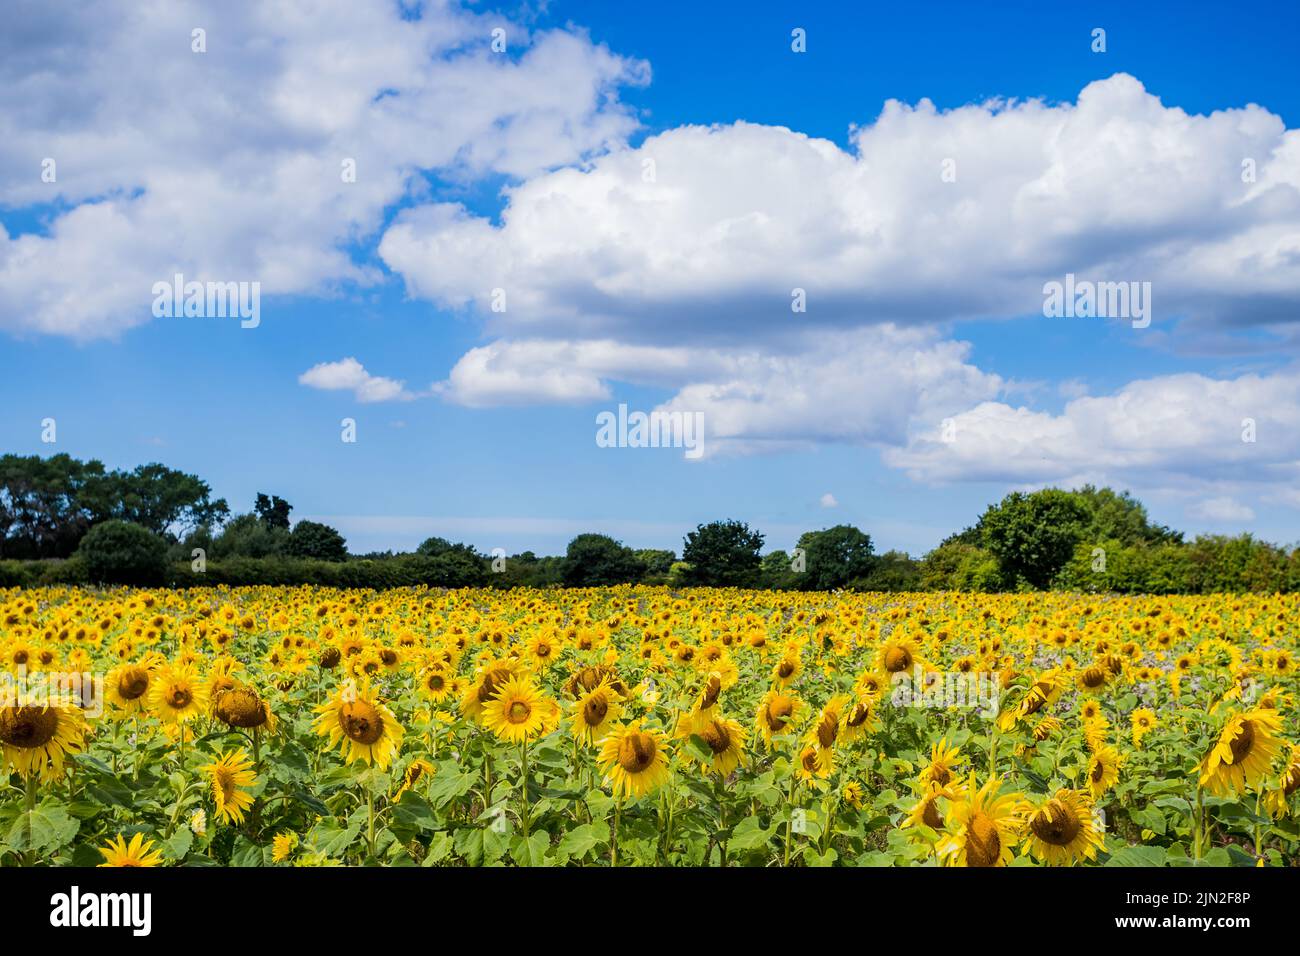 A field of beautiful sunflowers pictured under a blue sky in the summer of 2022 Stock Photo